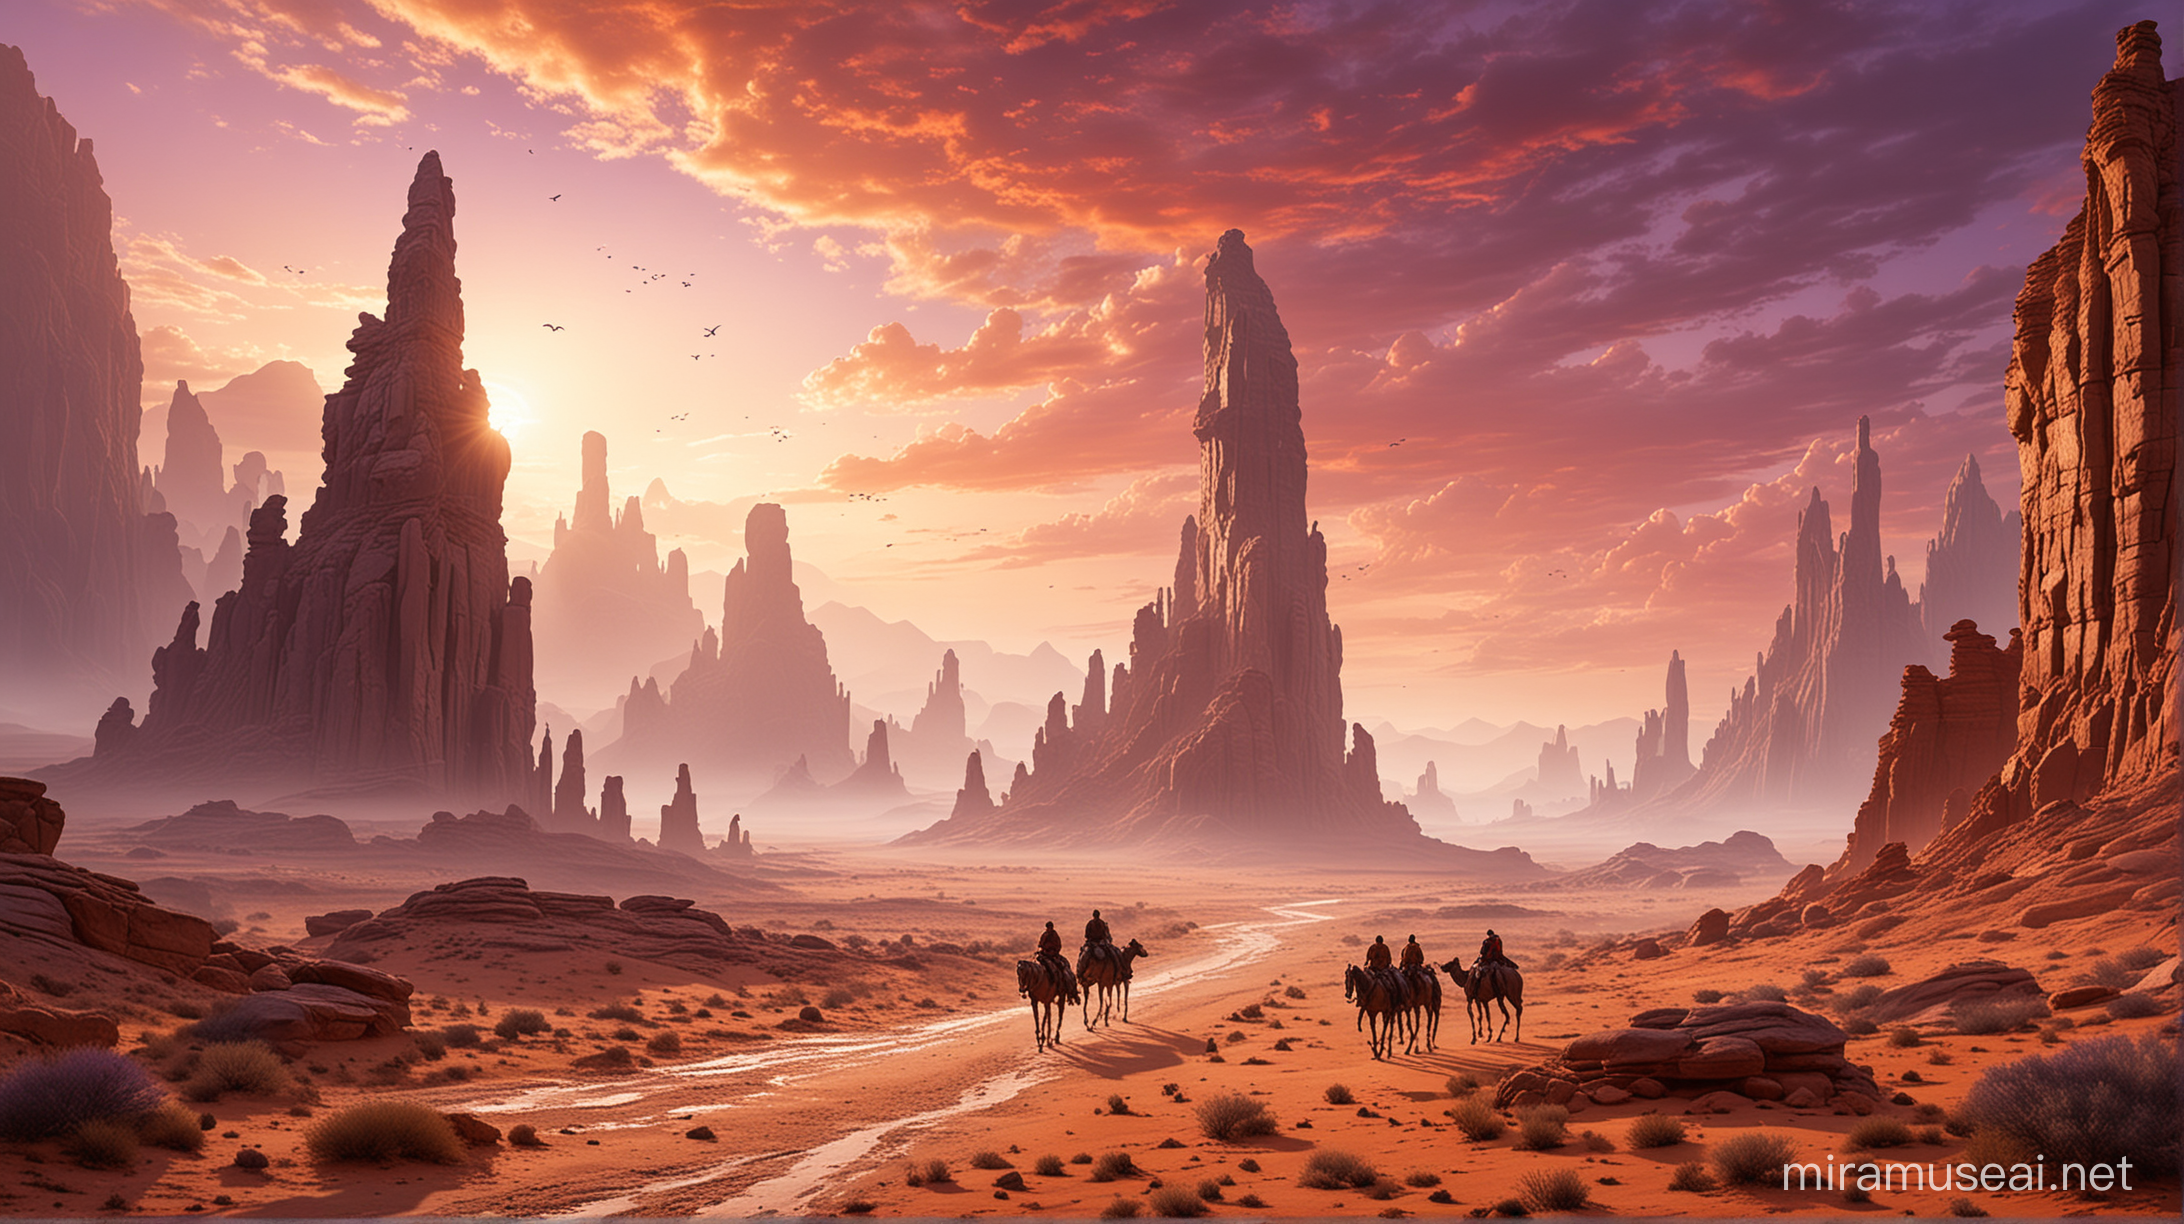 Surreal Desert Landscape with Ancient Structures and Nomadic Travelers